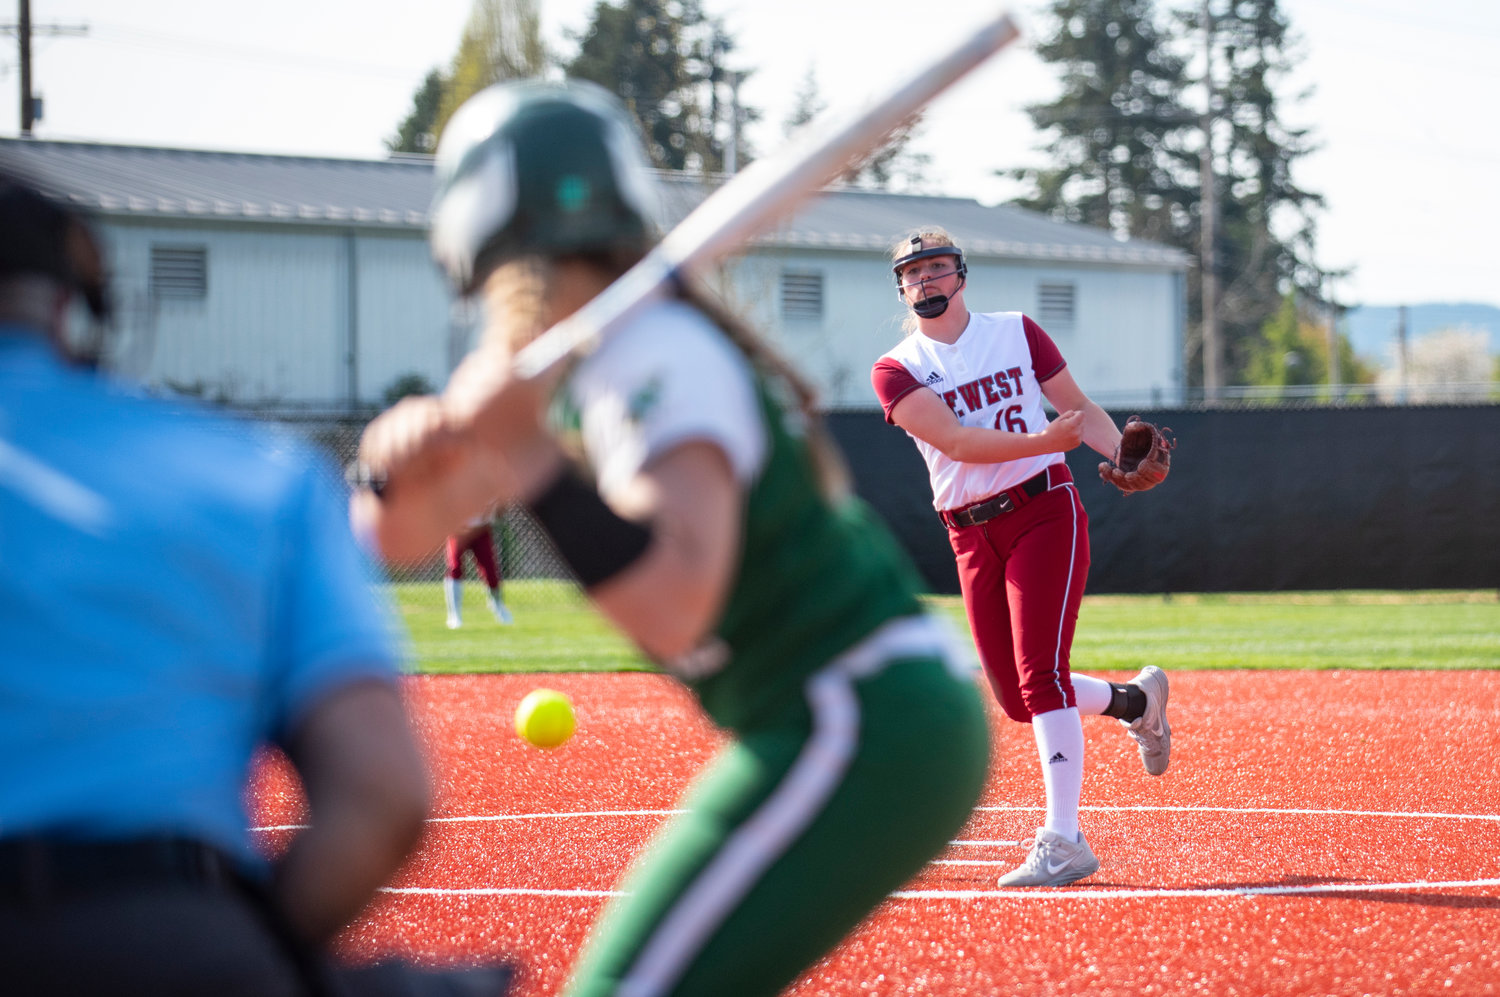 W.F. West junior ace Kamy Dacus delivers a pitch to a Tumwater batter on Wednesday at home.